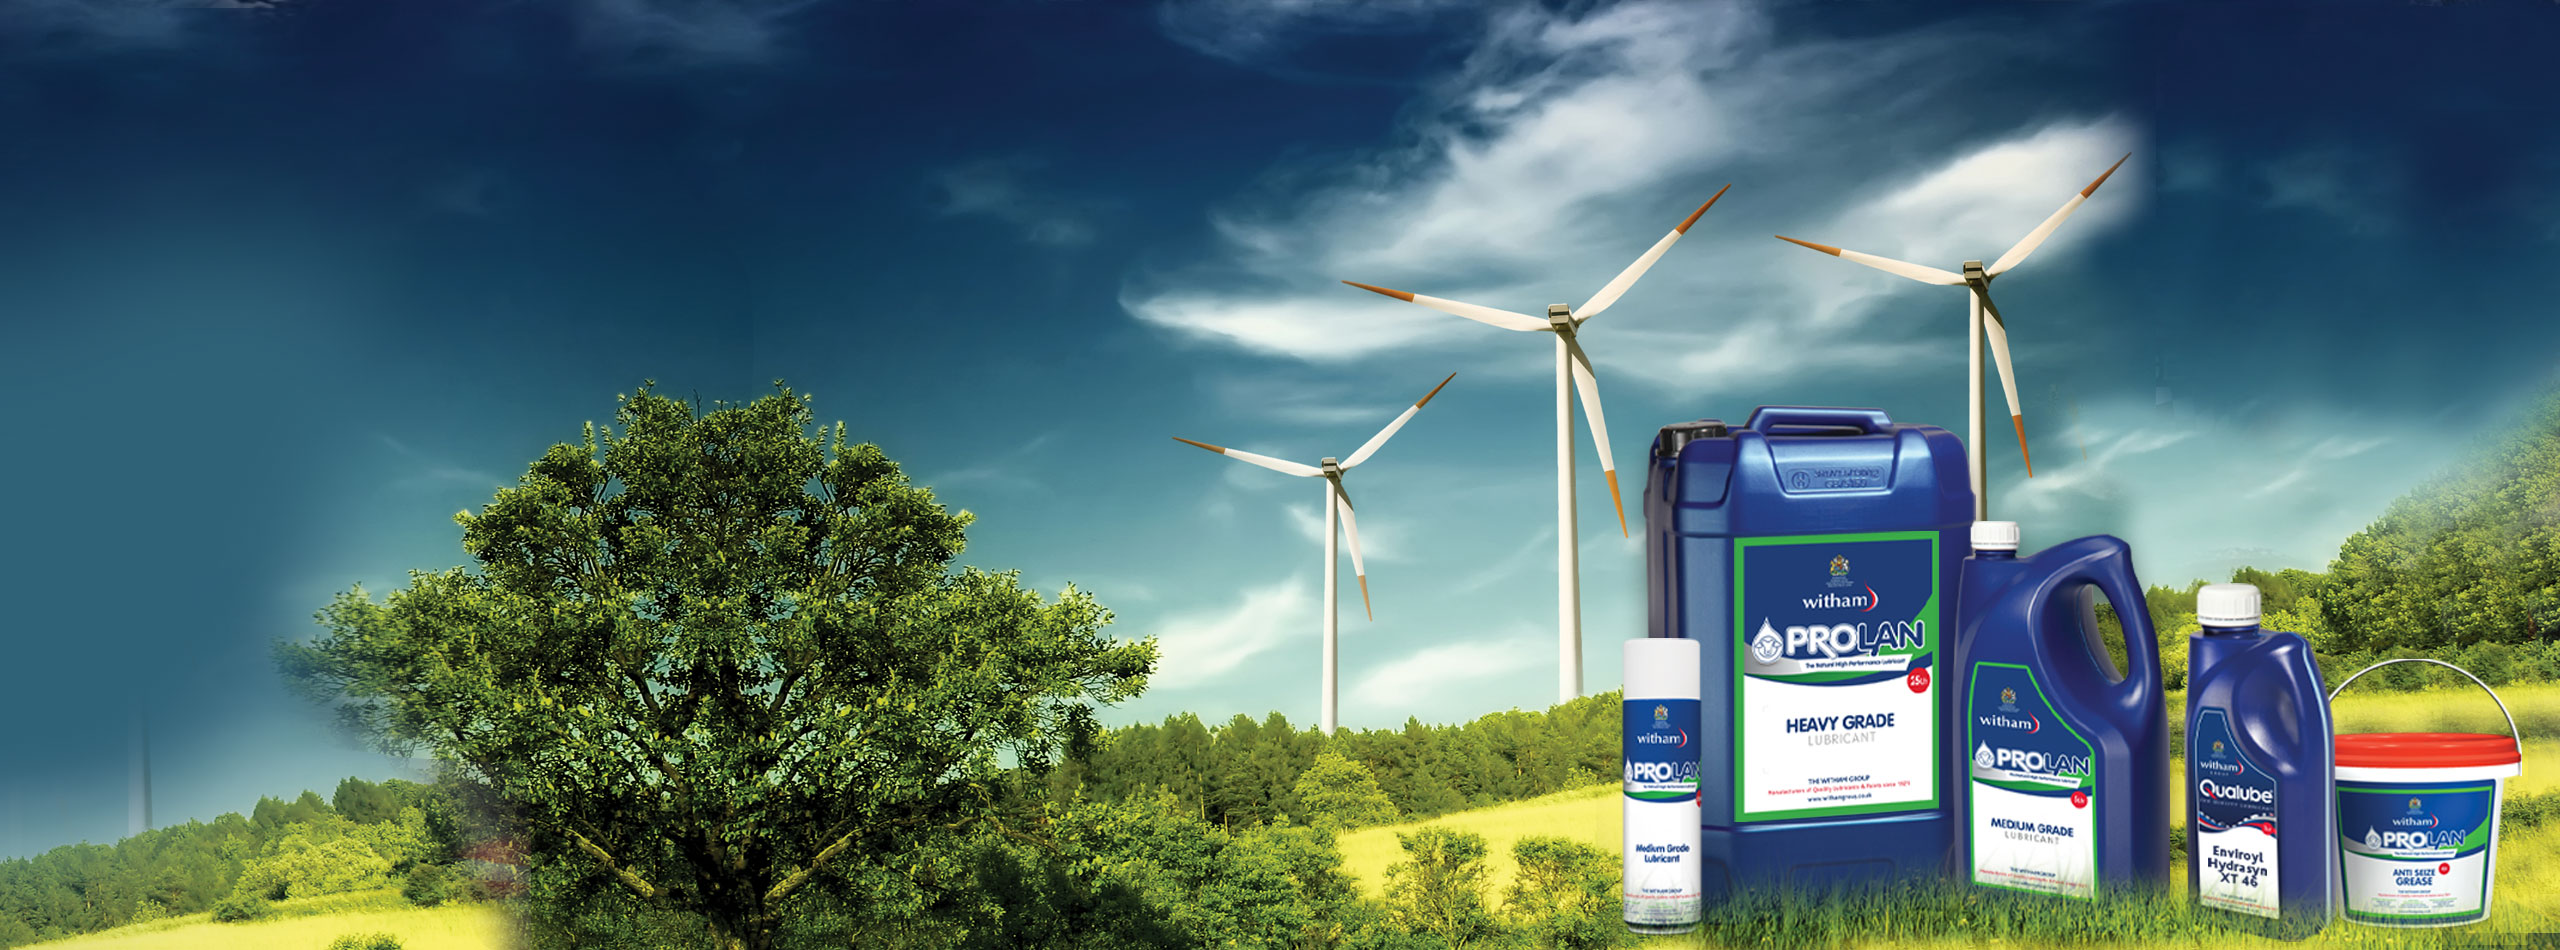 White wind turbines in a green landscape with overlay of environmentally conscious products in dark blue packaging 